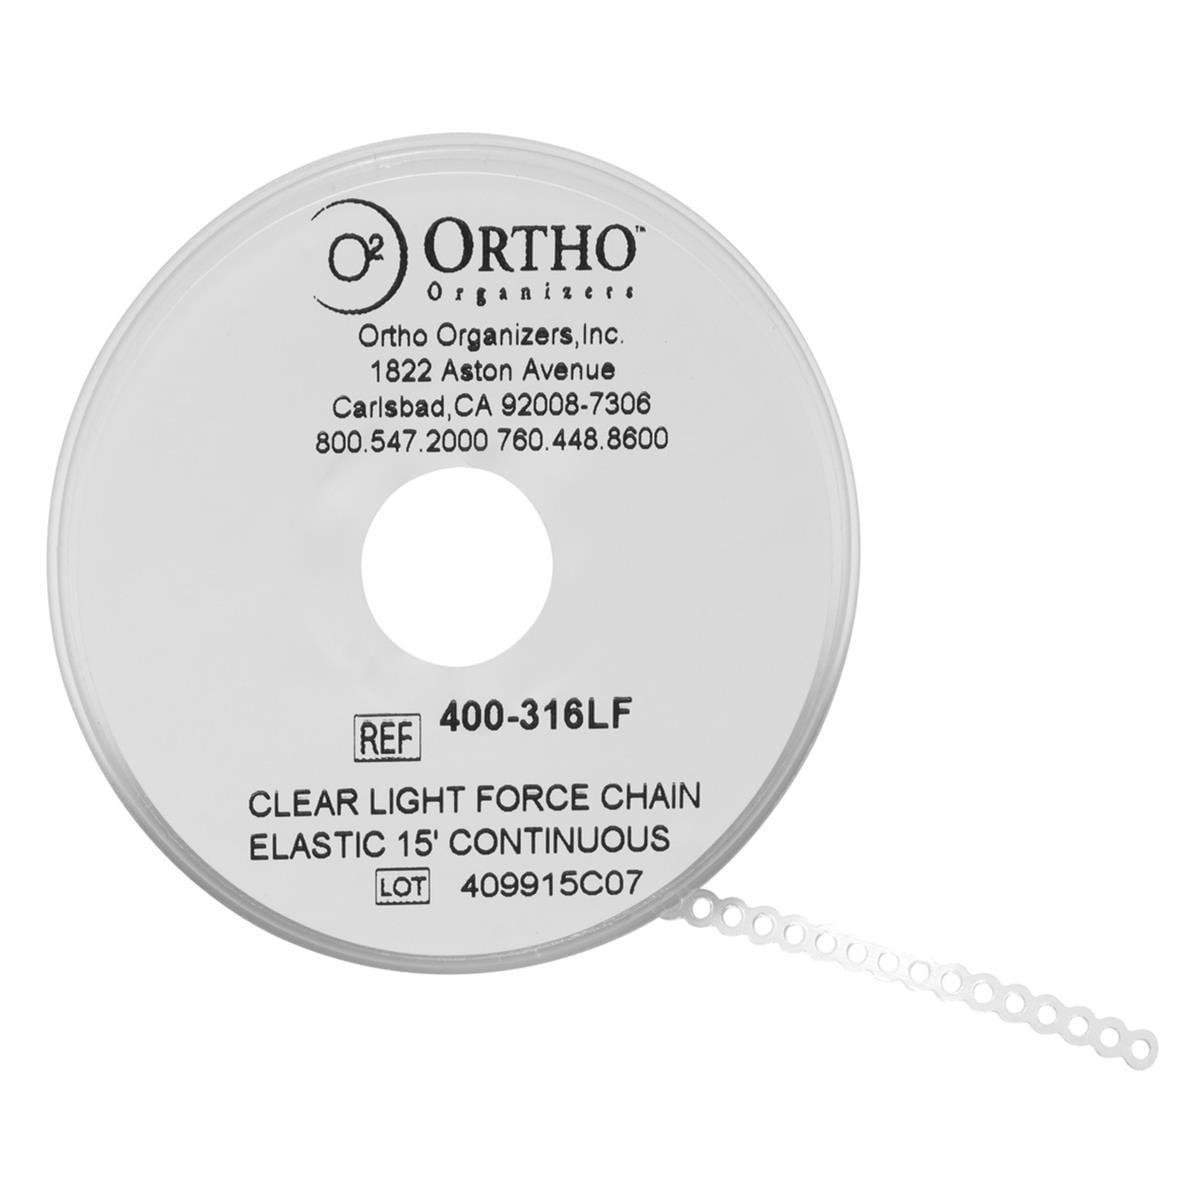 Chain Elastic 15' Light Force Continuous Clear